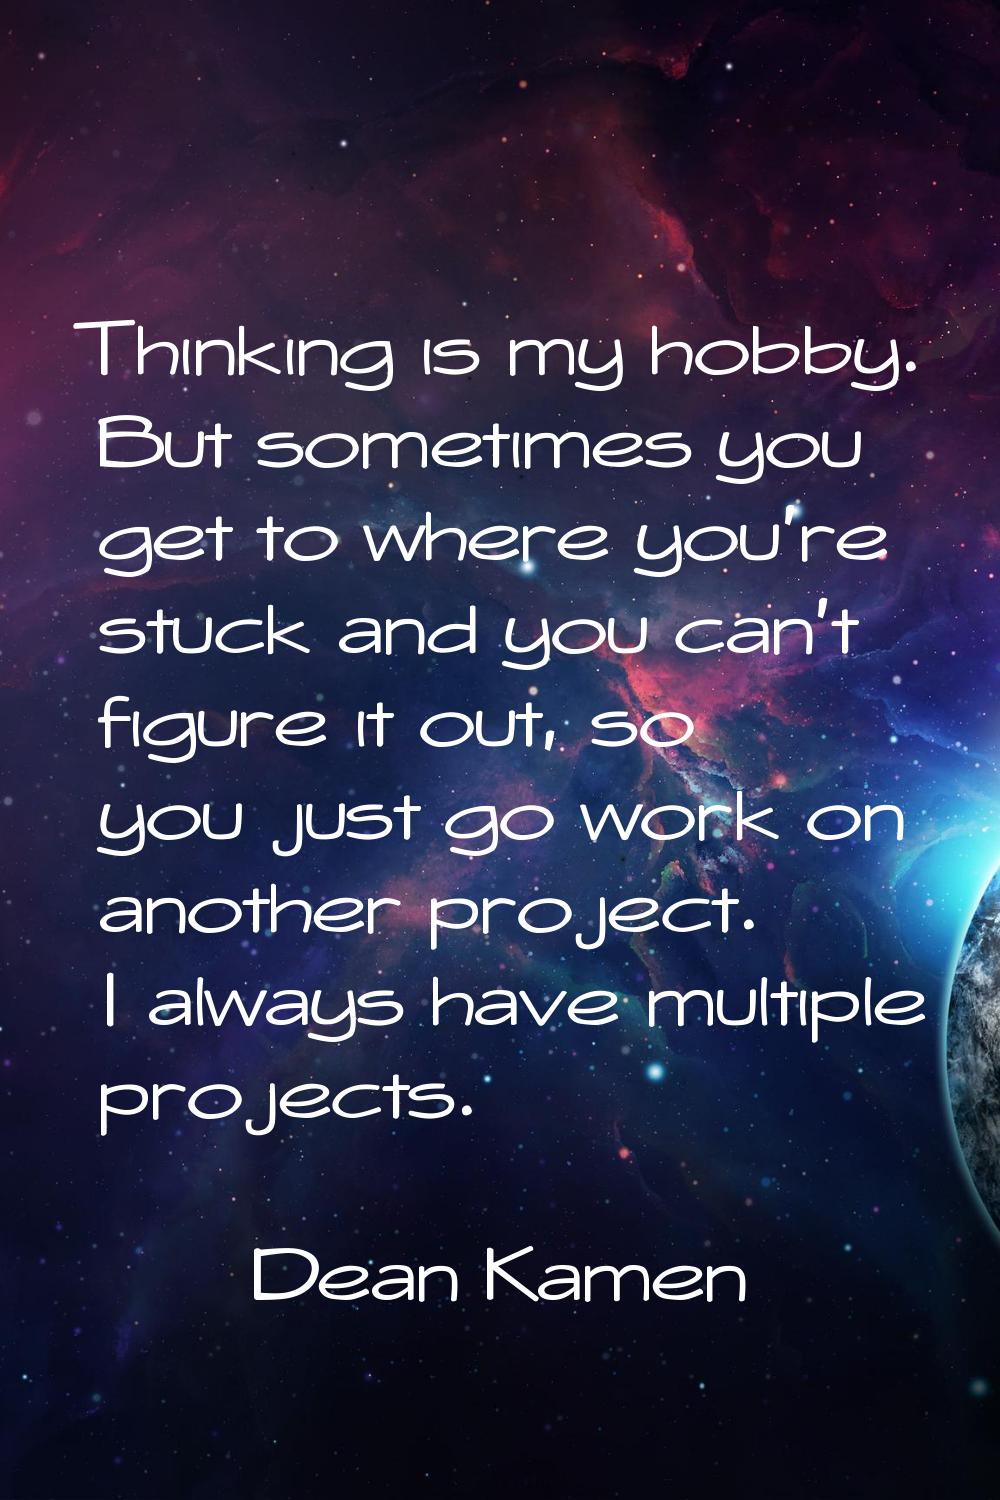 Thinking is my hobby. But sometimes you get to where you're stuck and you can't figure it out, so y